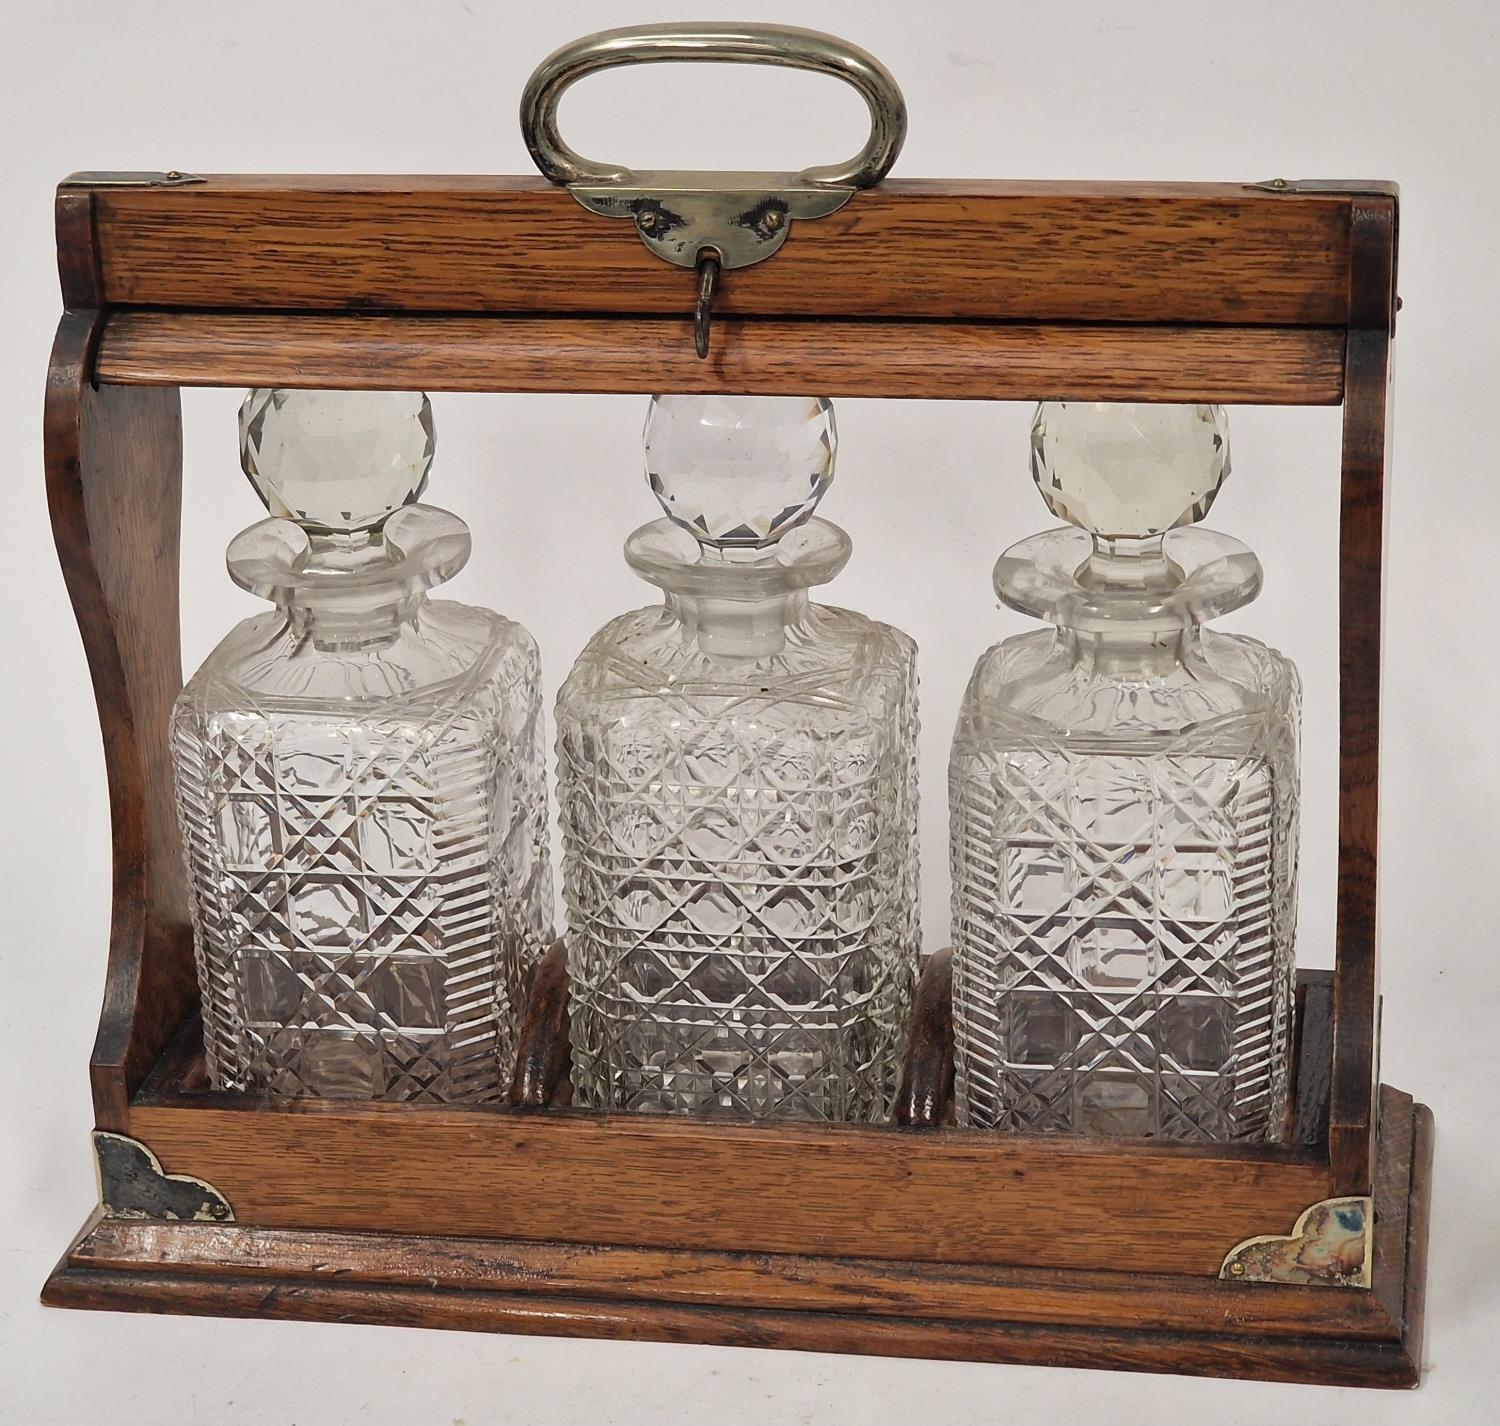 Vintage oak tantulus containing a matching set of three crystal glass decanters. Includes key.